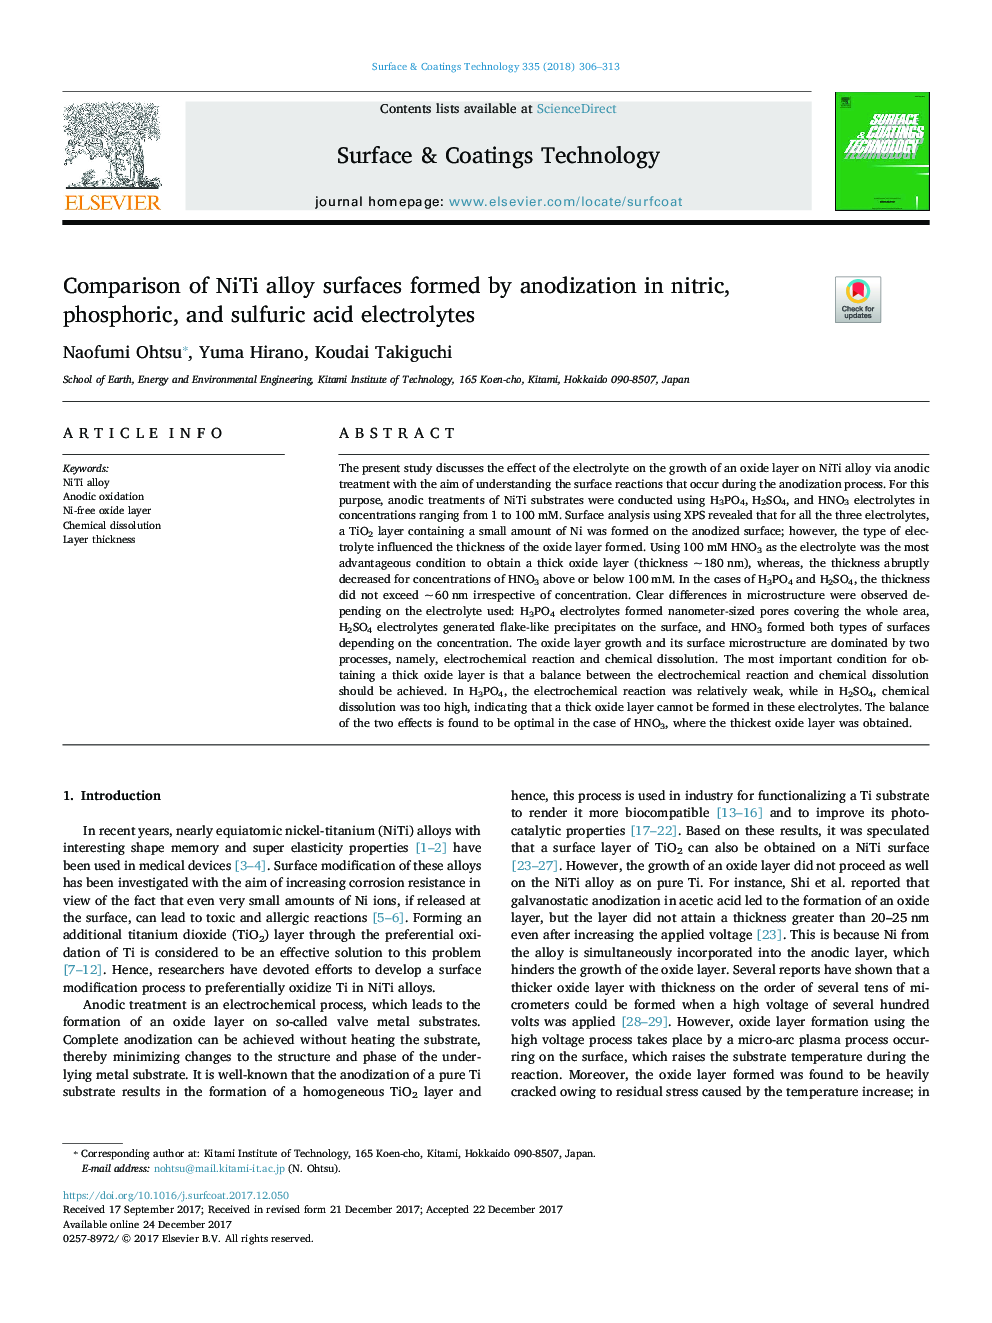 Comparison of NiTi alloy surfaces formed by anodization in nitric, phosphoric, and sulfuric acid electrolytes